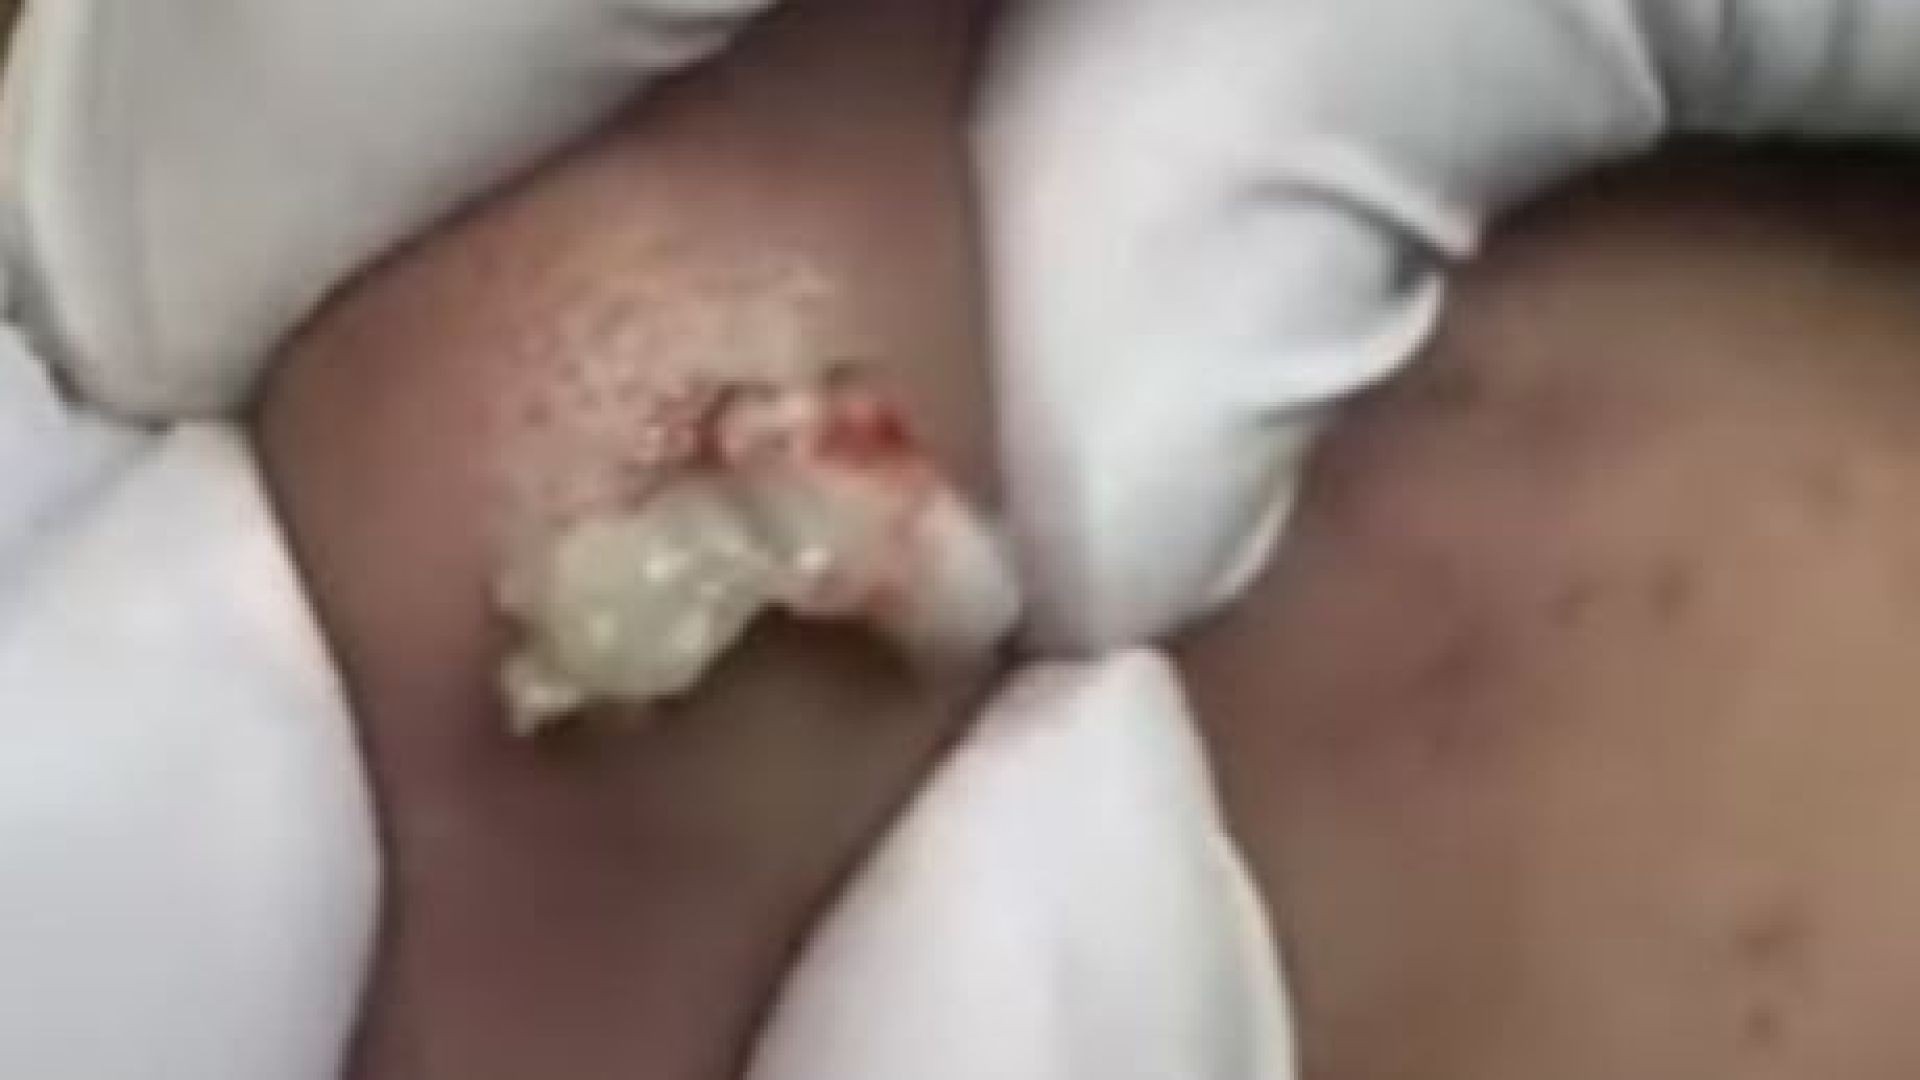 Great cyst popped on face